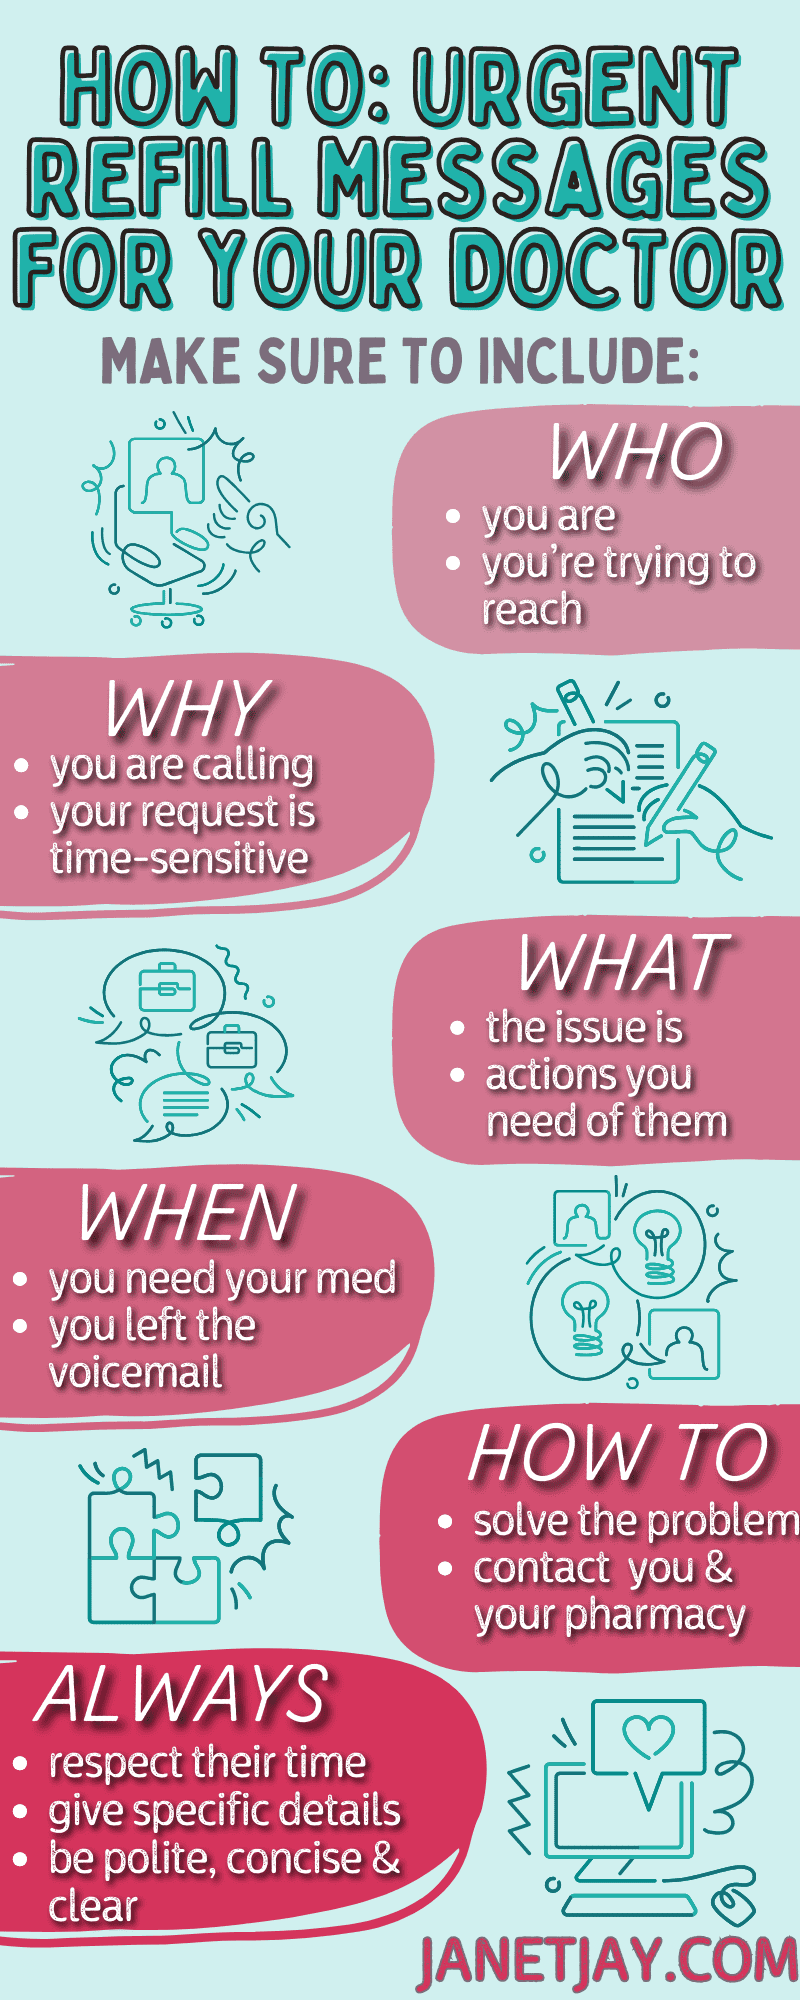 An infographic titled "how to message your doctor for refill requests" with six sections detailing what to include in the message: why you're calling, who you are, the issue, when you left your last message, what you need, and how to solve the problem, from janetjay.com